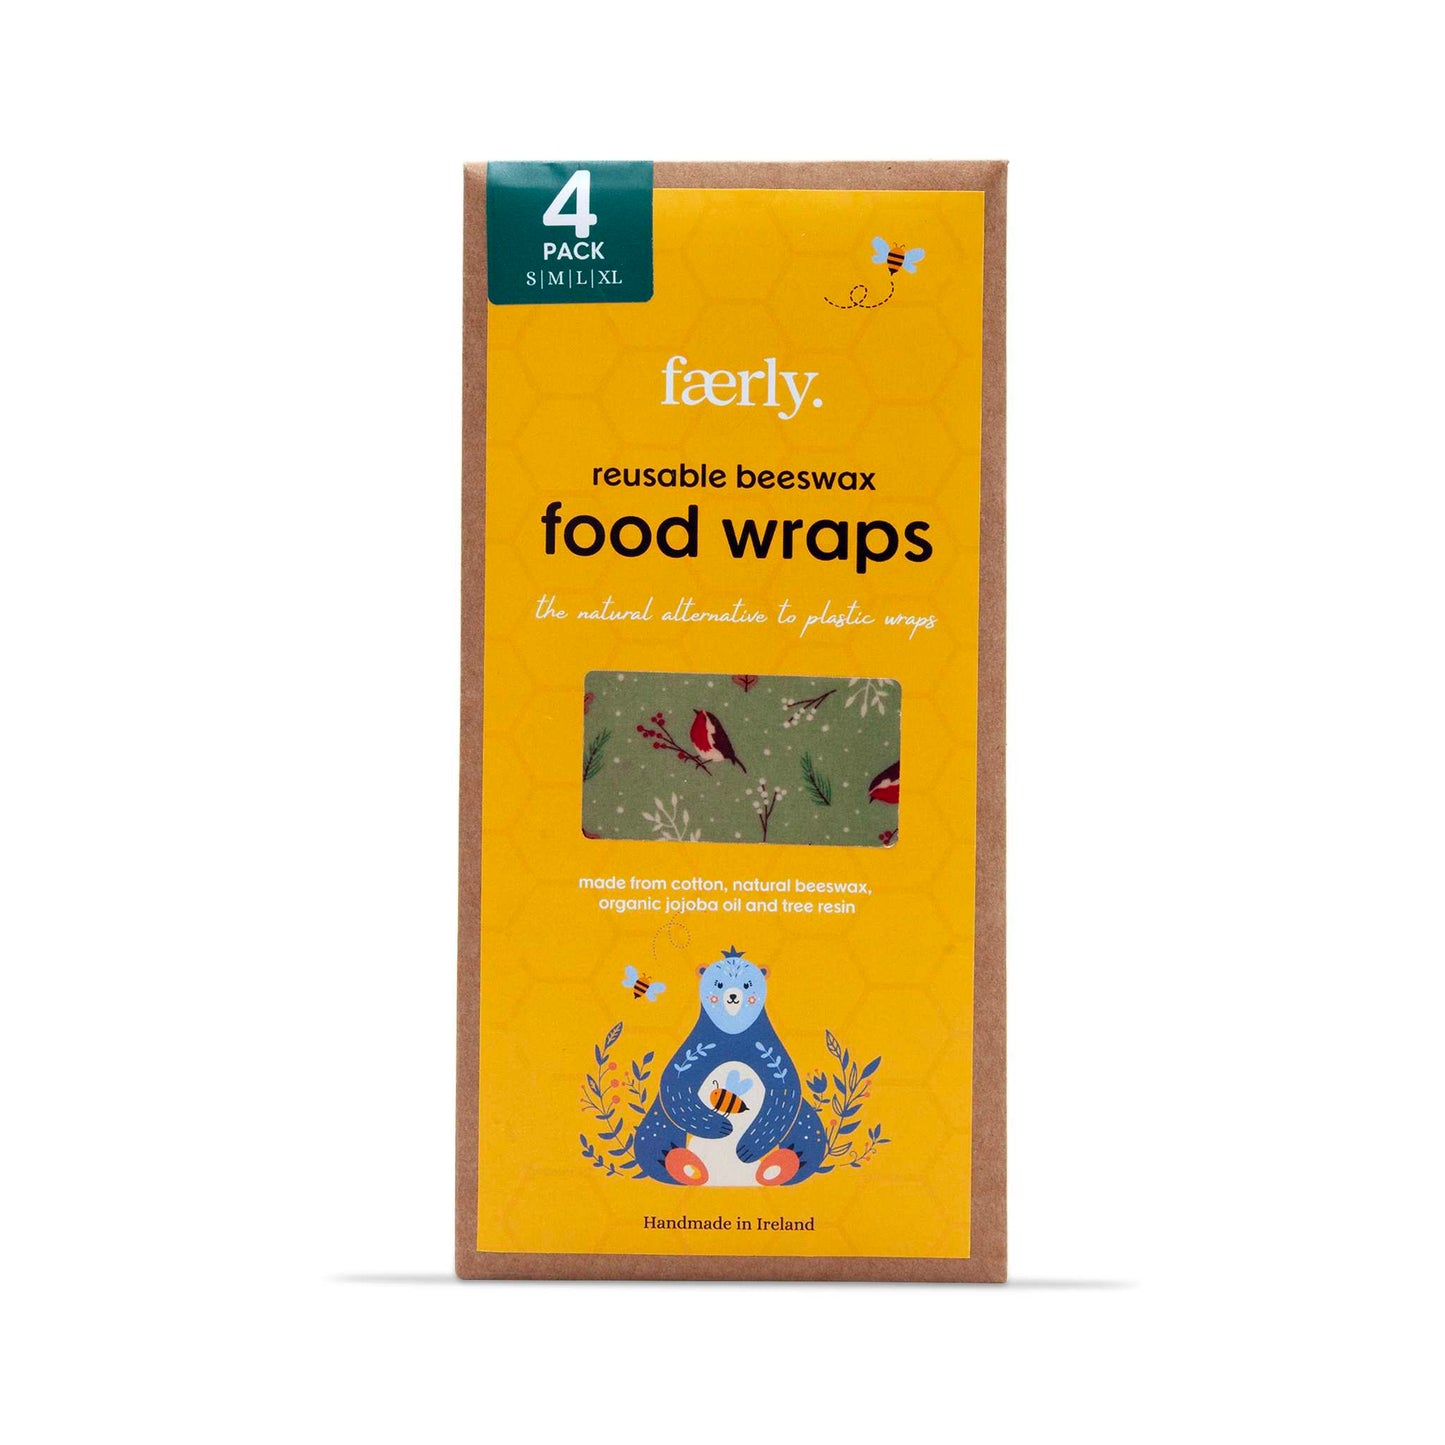 Faerly Food Wrap Beeswax Reusable Food Wraps - Variety Pack of 4